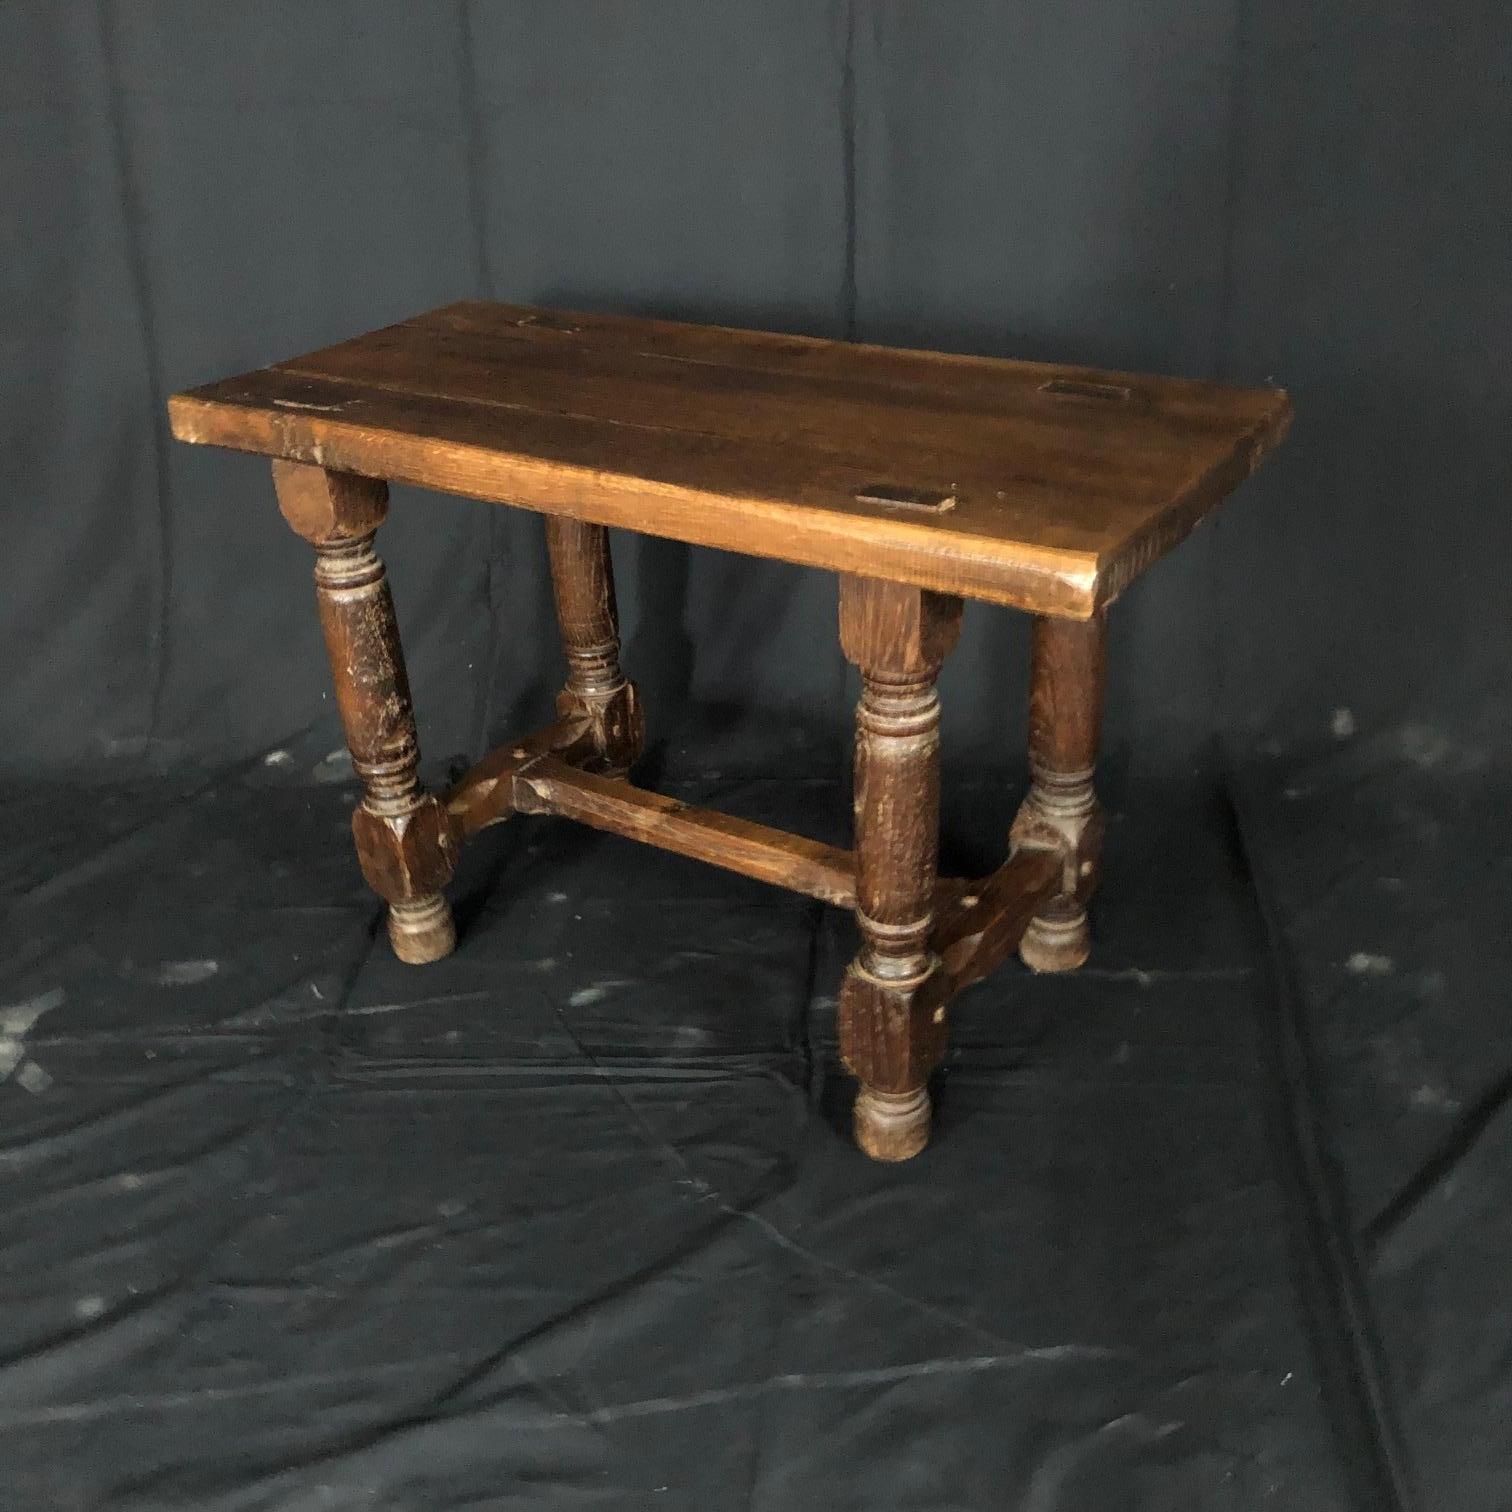 Rustic and charming French provincial 19th century oak farm bench with early pegged construction and turned legs.